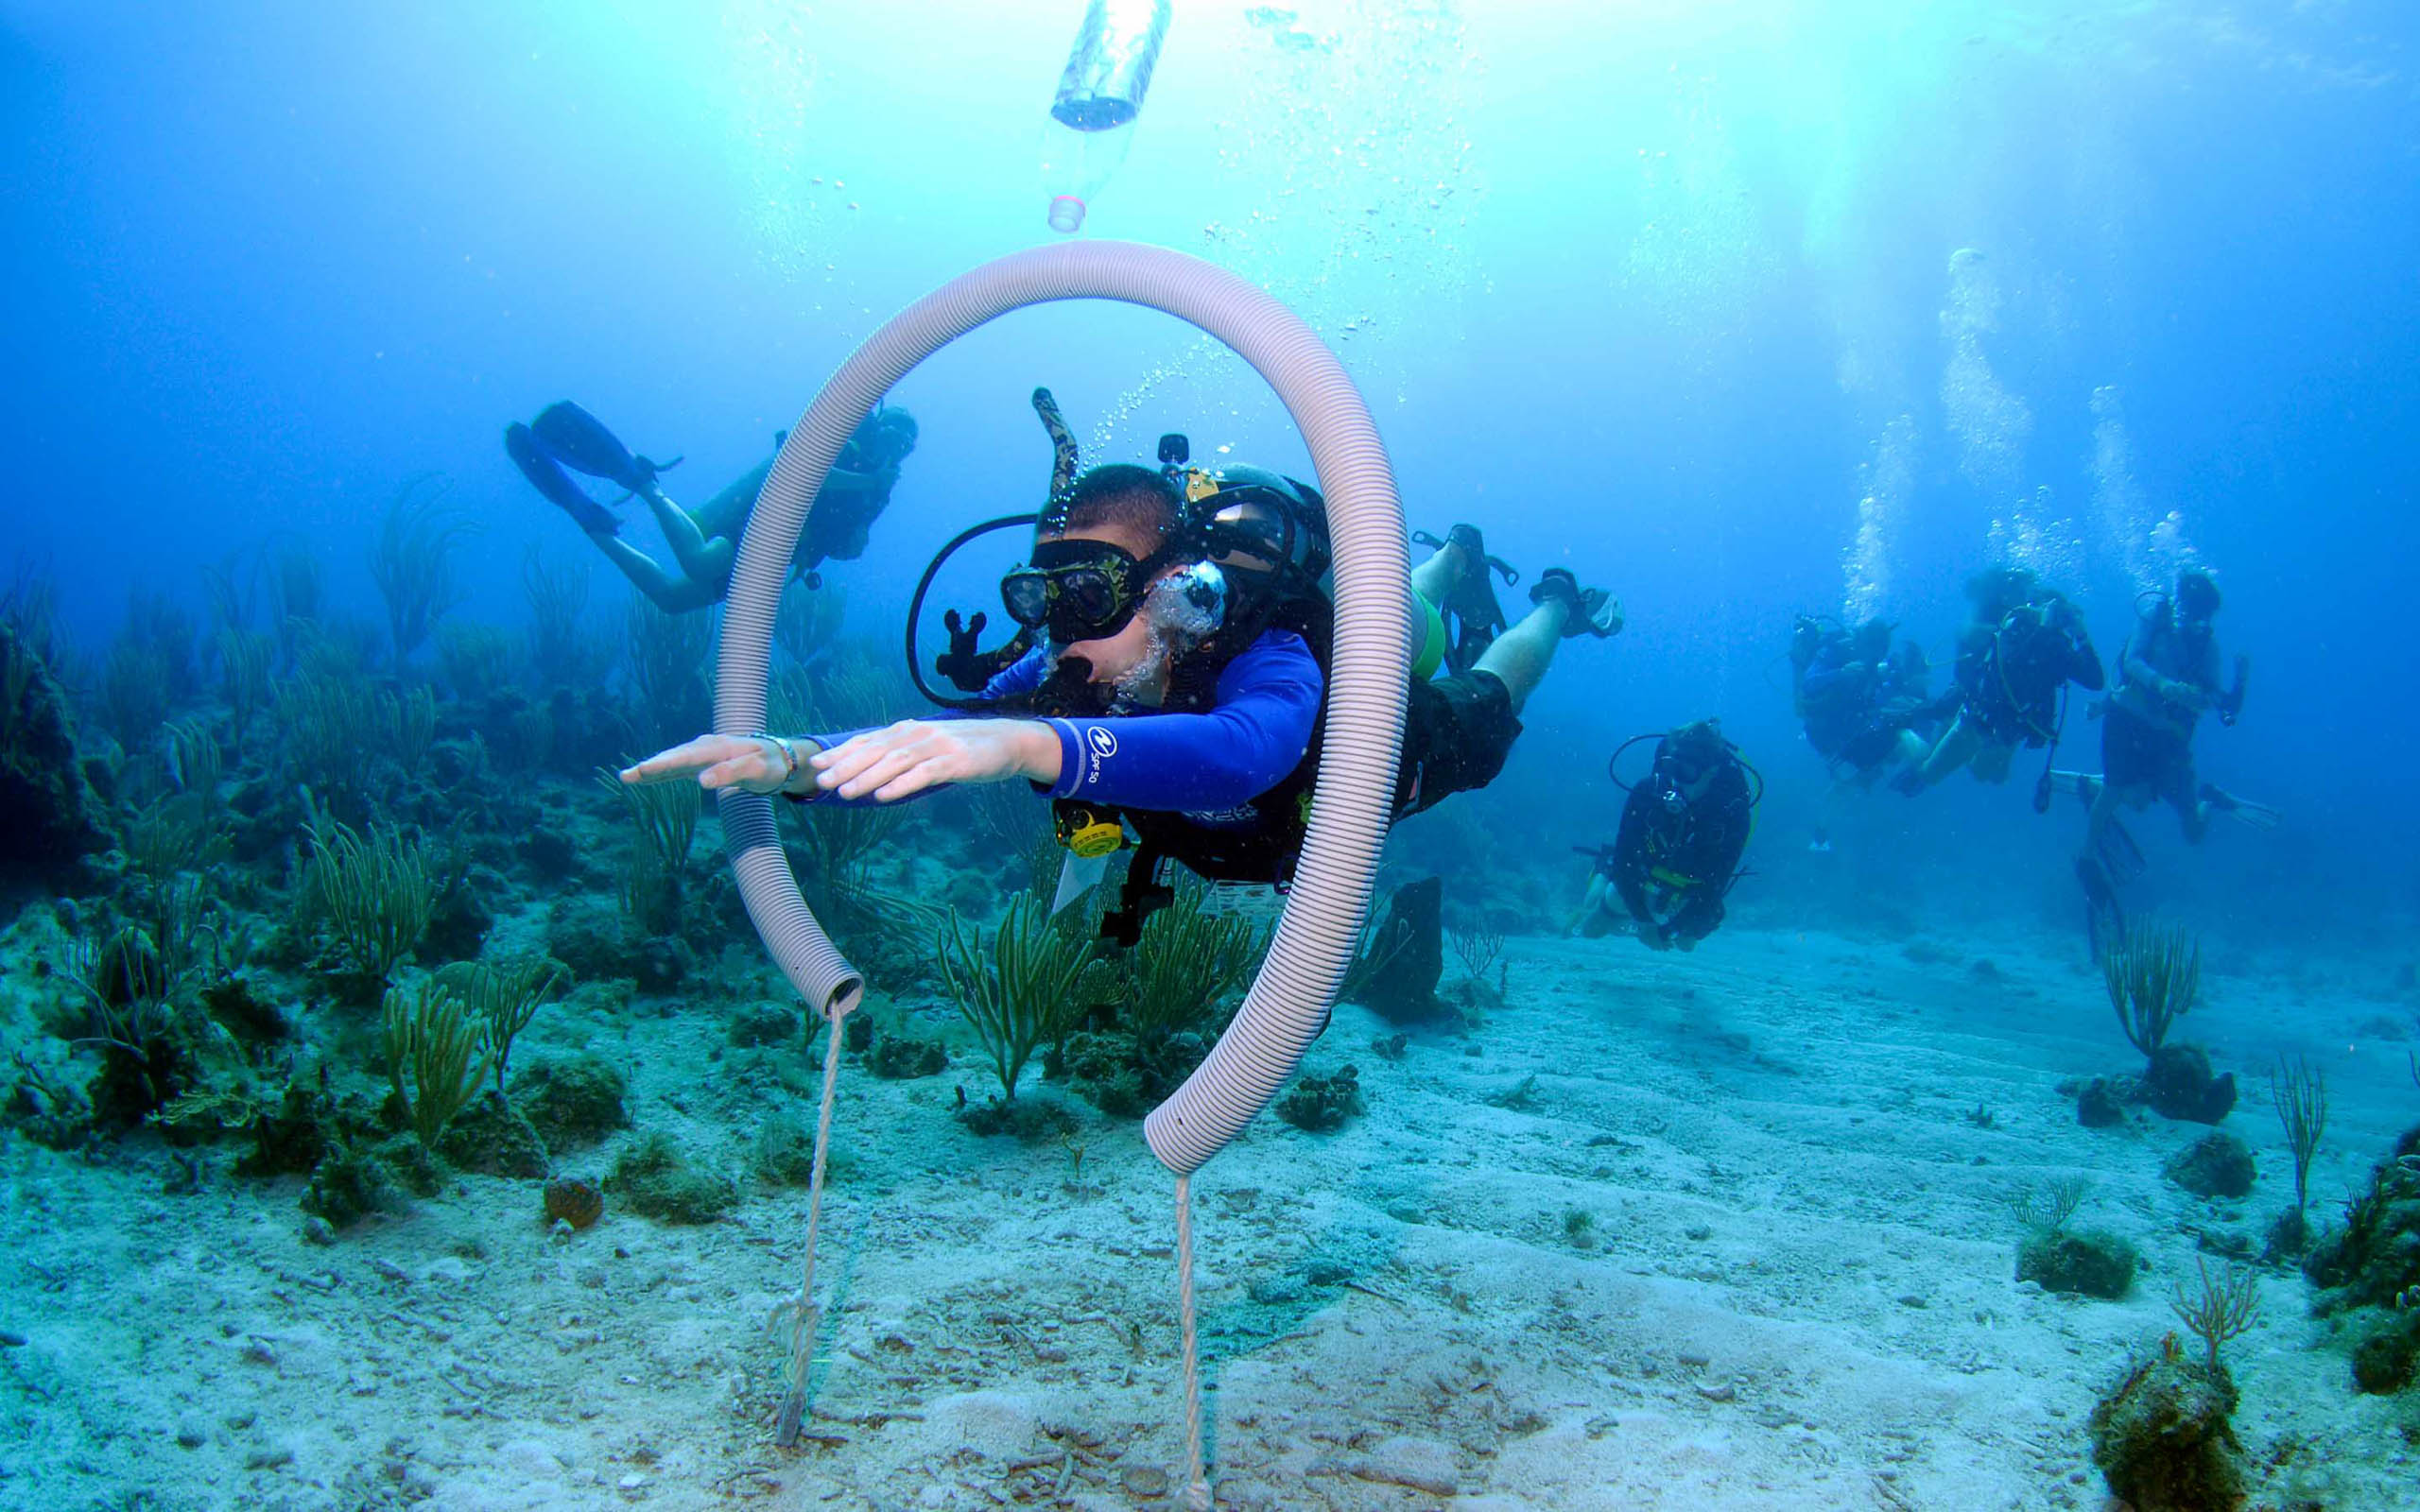 A group of scuba divers in a circle.